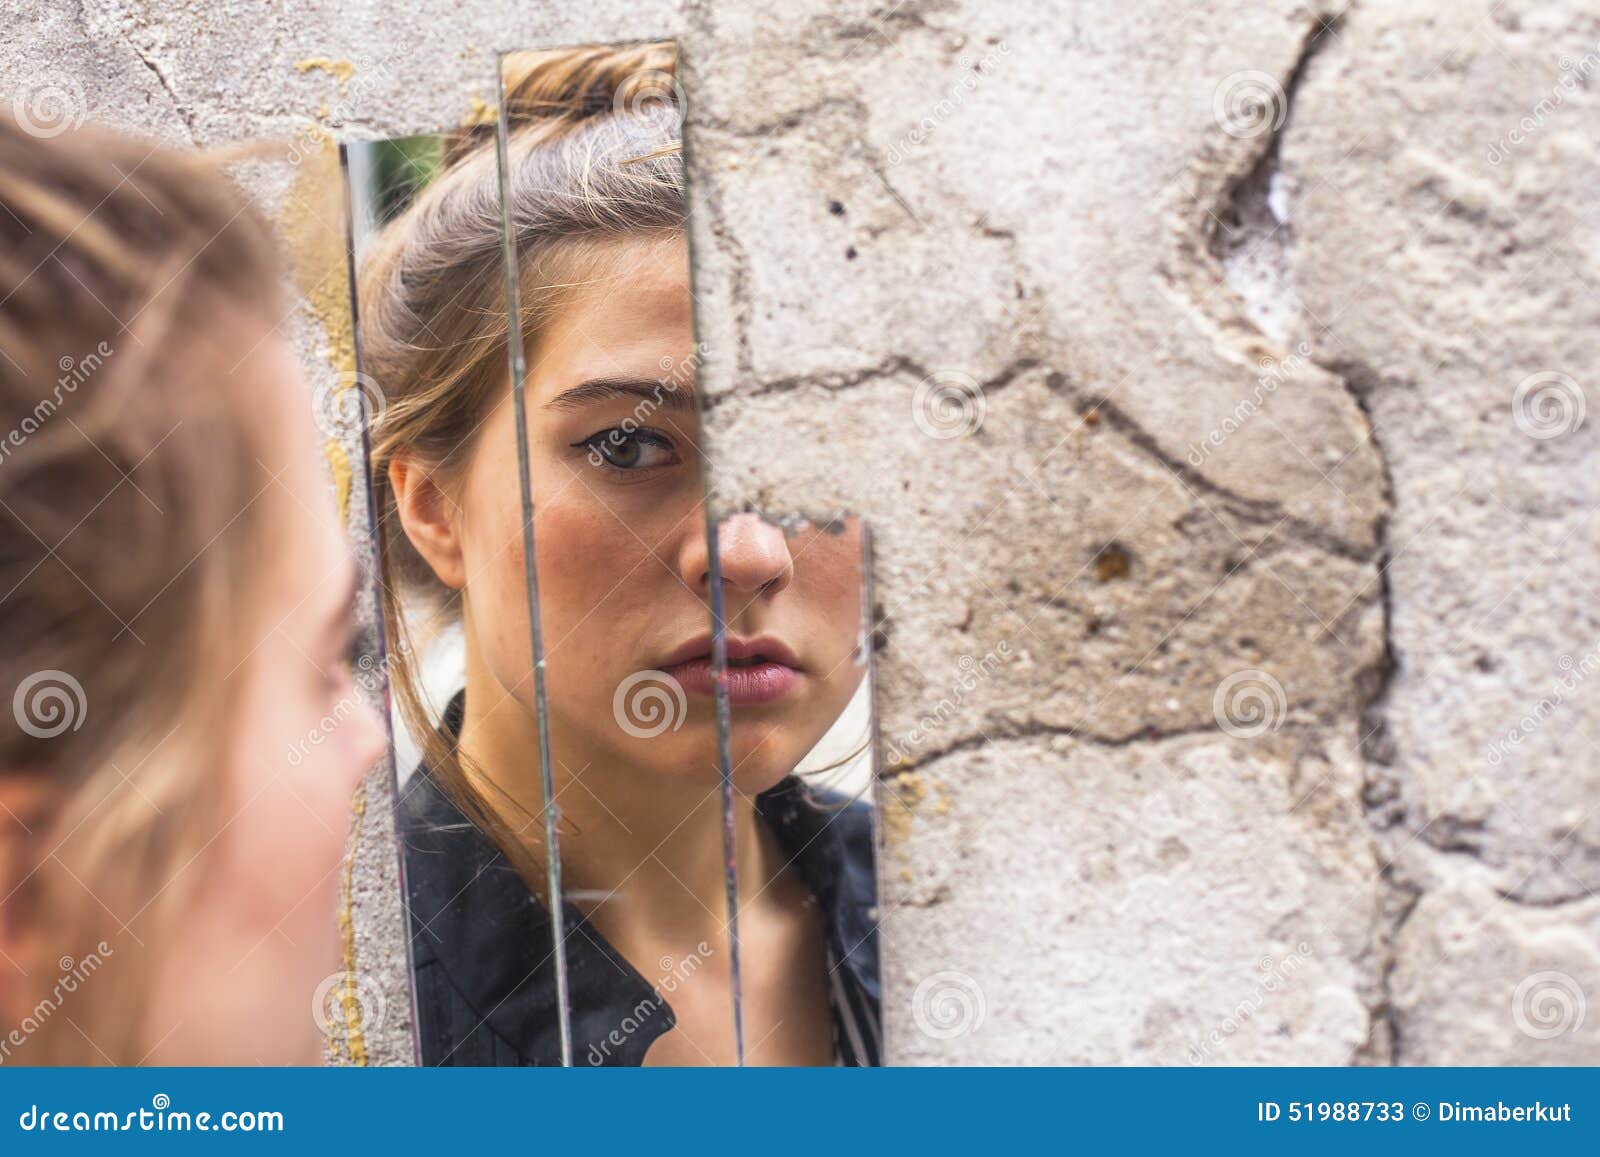 girl looking at her reflection in the mirror fragments on the wall at street.